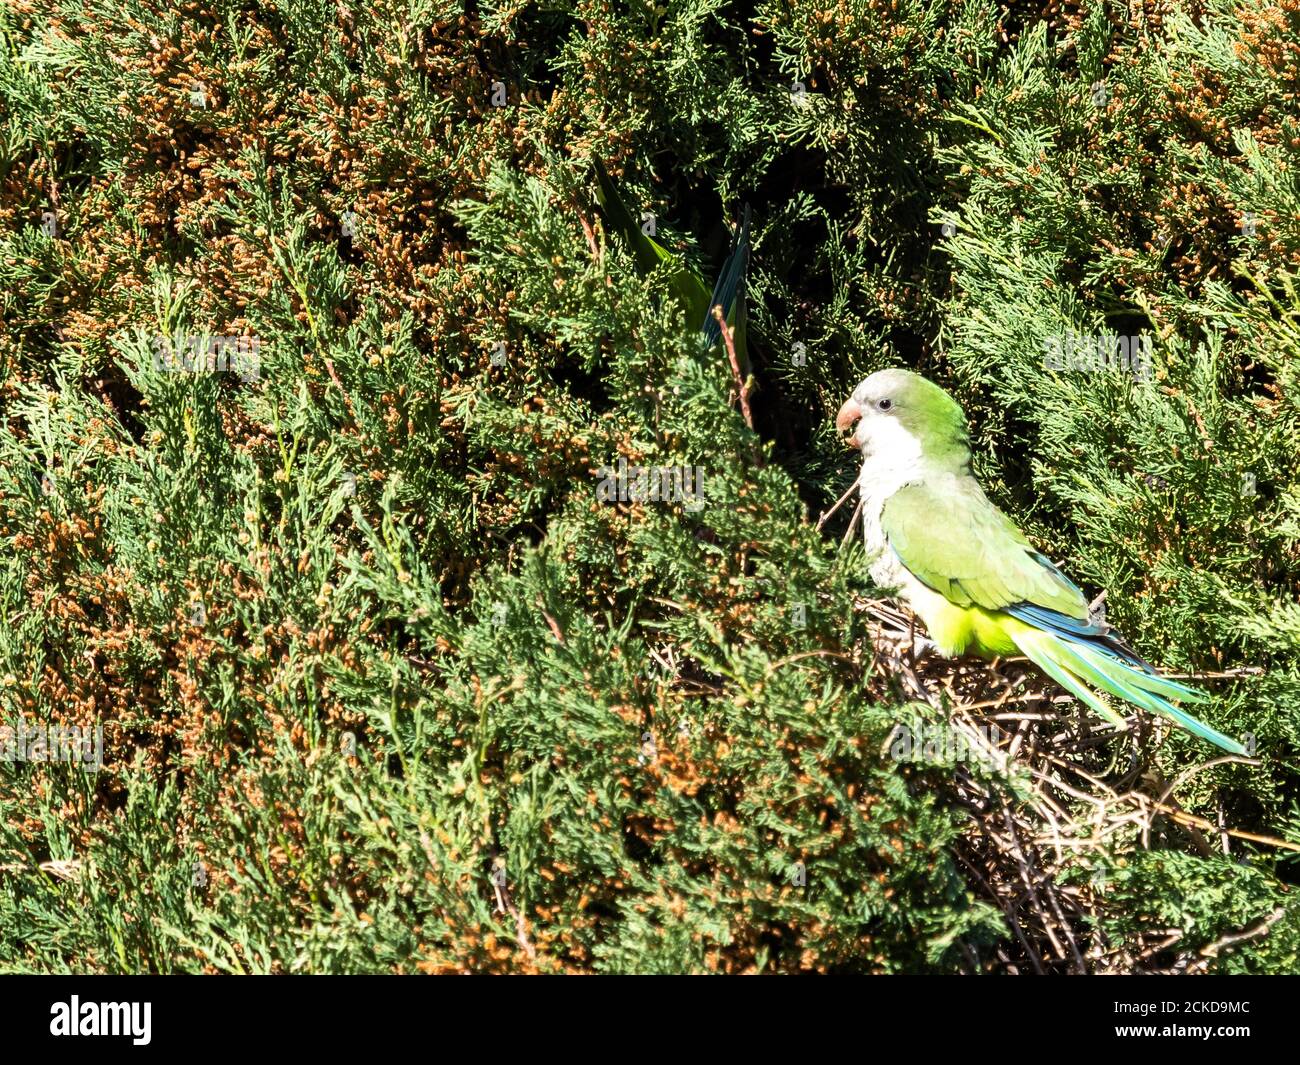 Cotorra Argentina, Cotorra Monje or Cotorra Verdigris, bird belonging to the parrot family introduced in much of Europe as a companion animal. Stock Photo